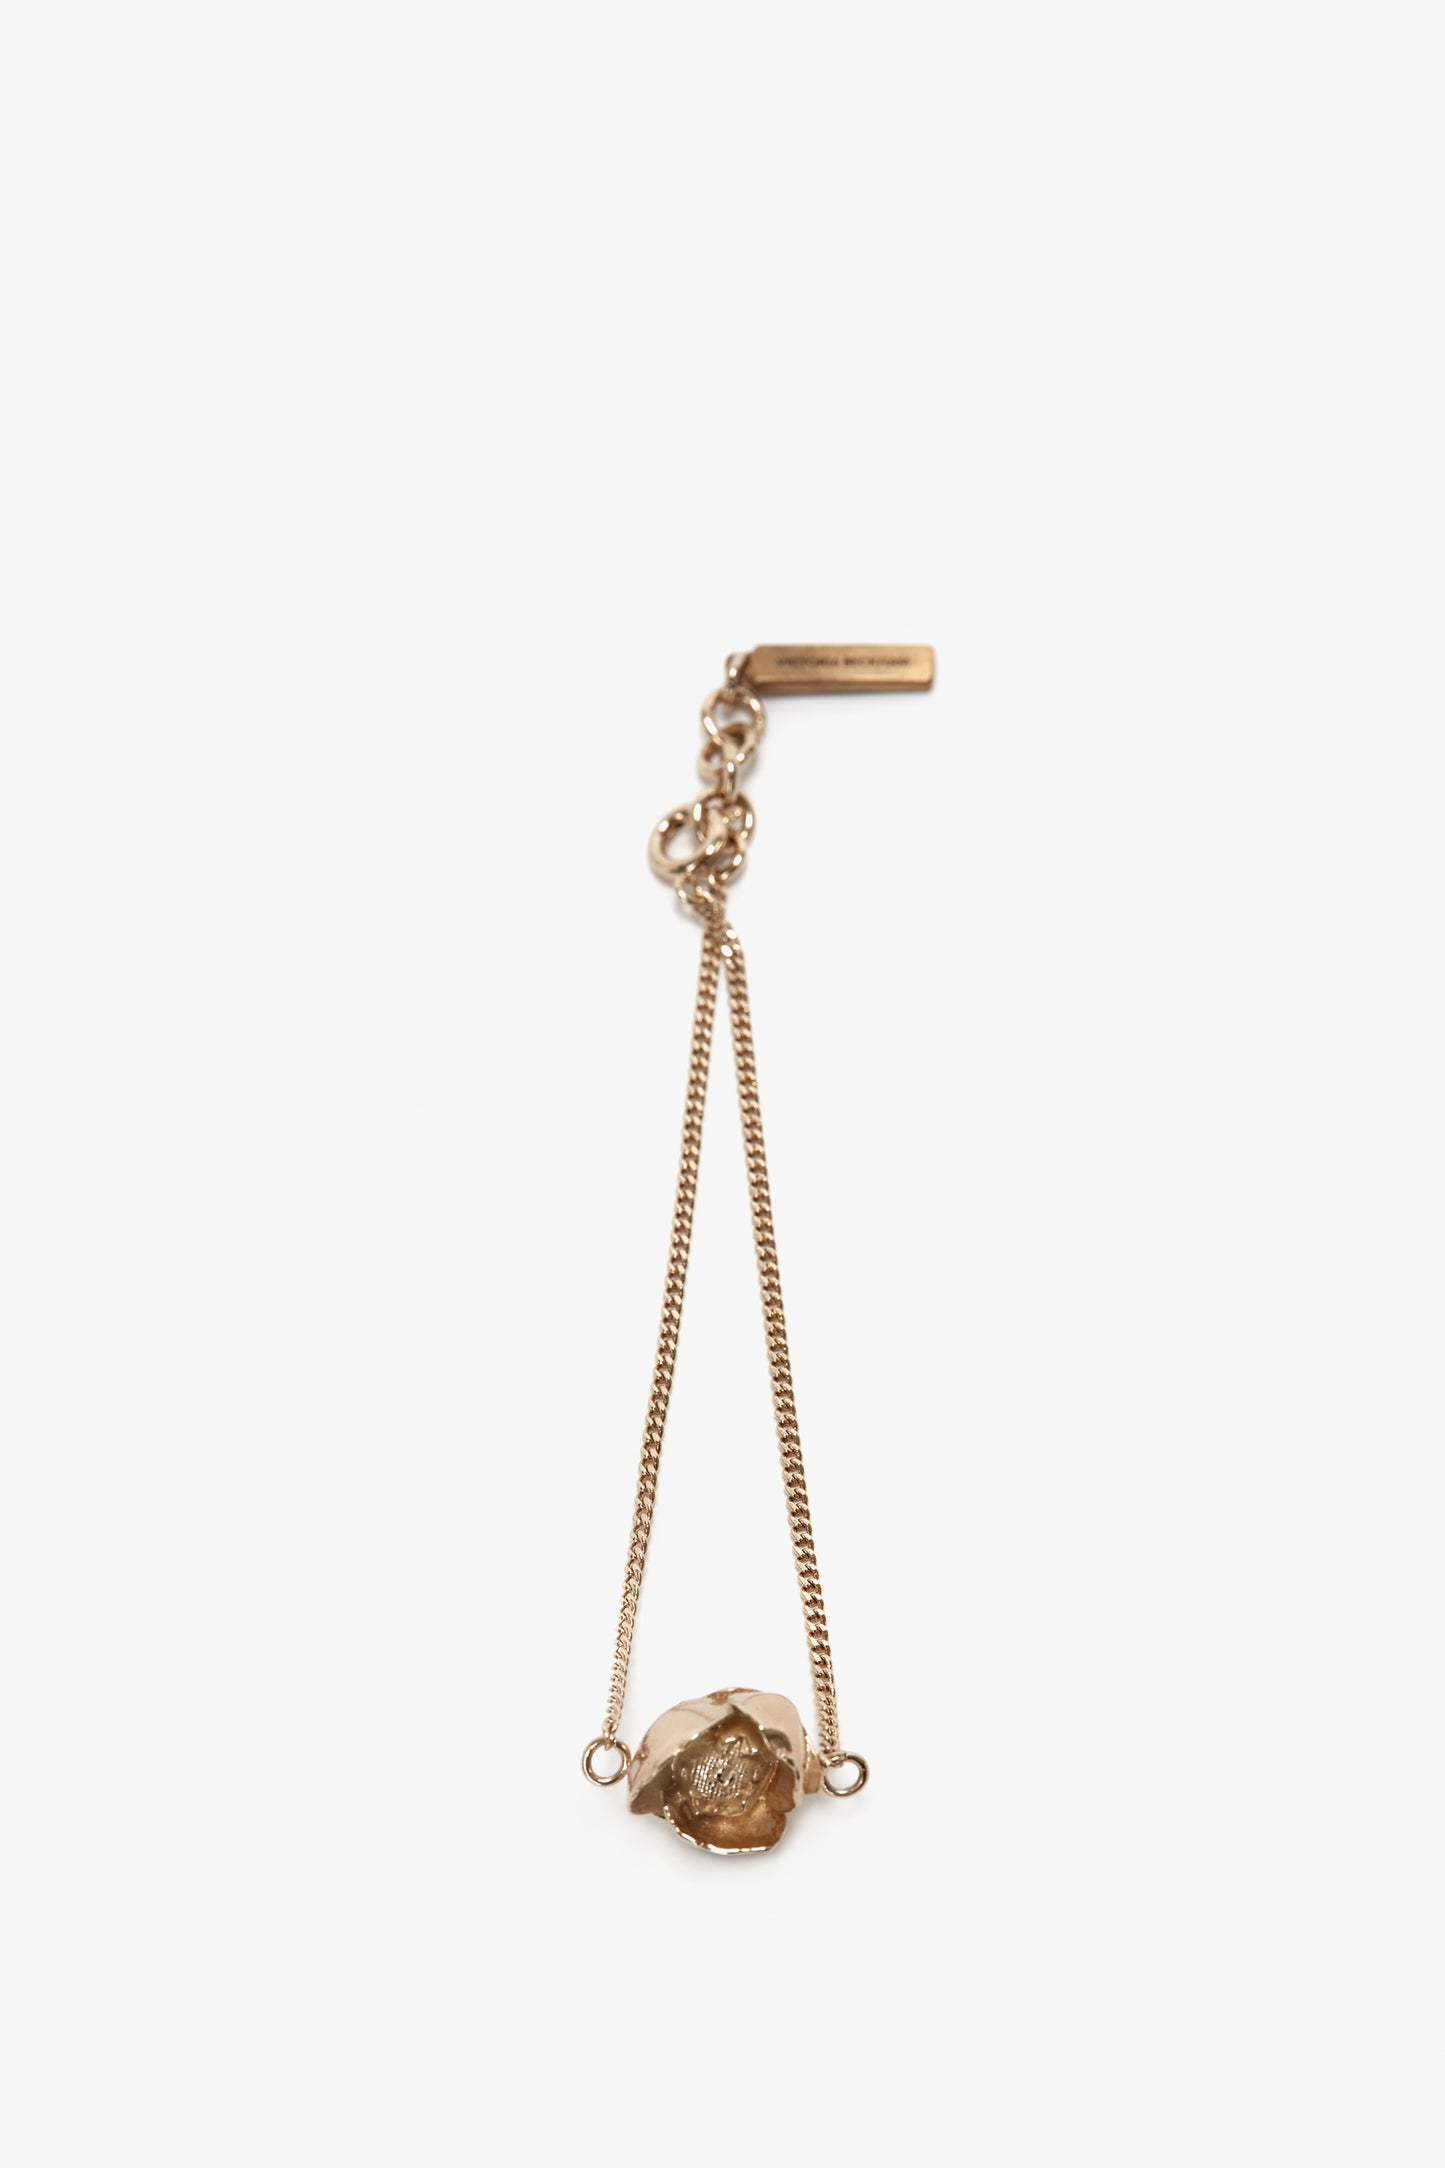 A Victoria Beckham Exclusive Camellia Flower Bracelet In Gold, featuring a rough-cut stone set in a simple pendant design, with an adjustable chain and clasp attachment at the top.